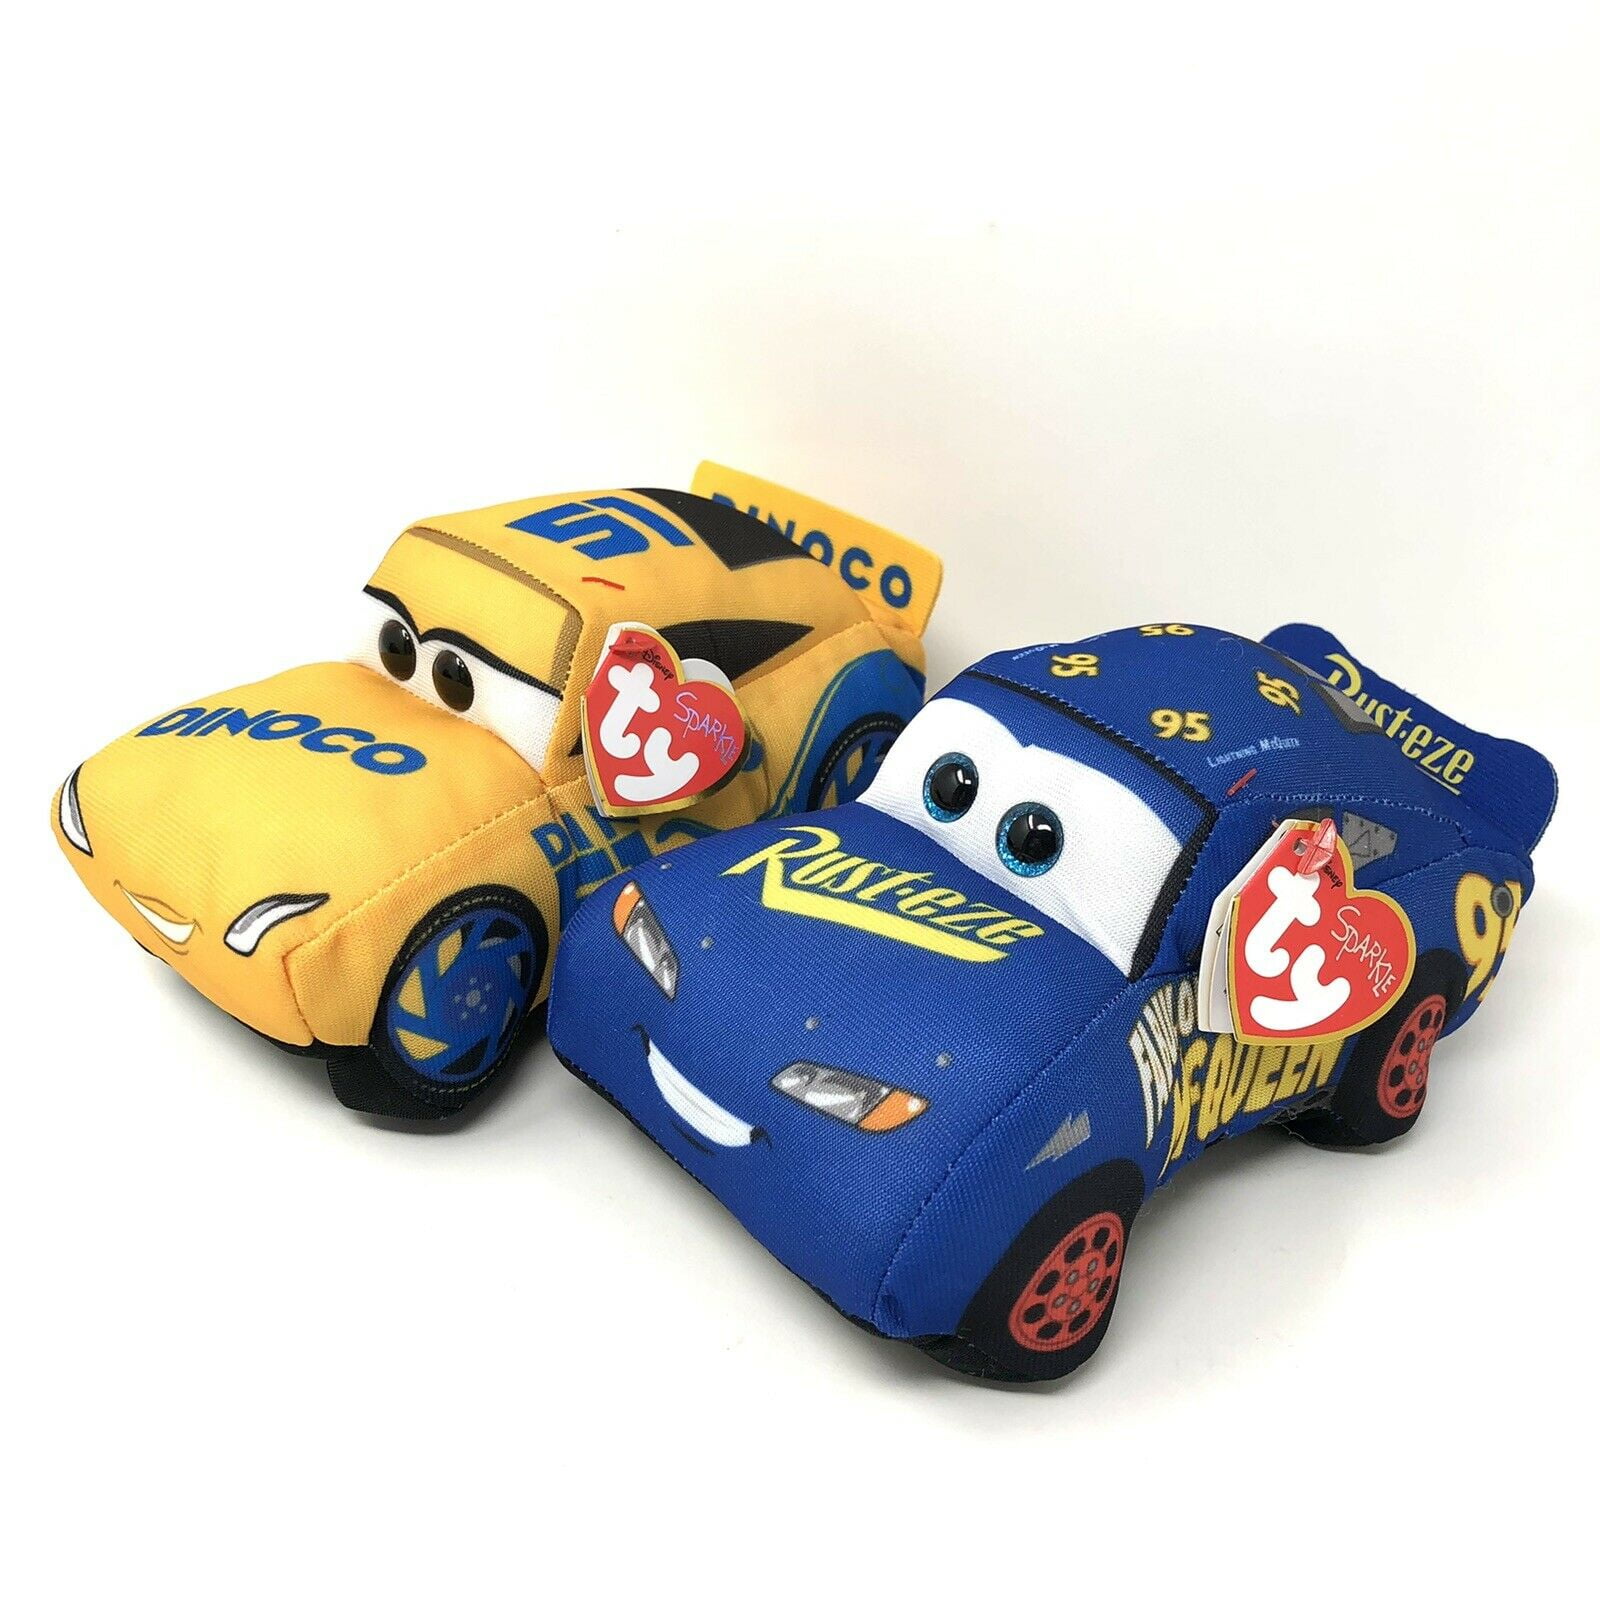 1pc Disney Cars Talking Race Pals Lighting McQueen OR Mater Plush Doll Kid Toy